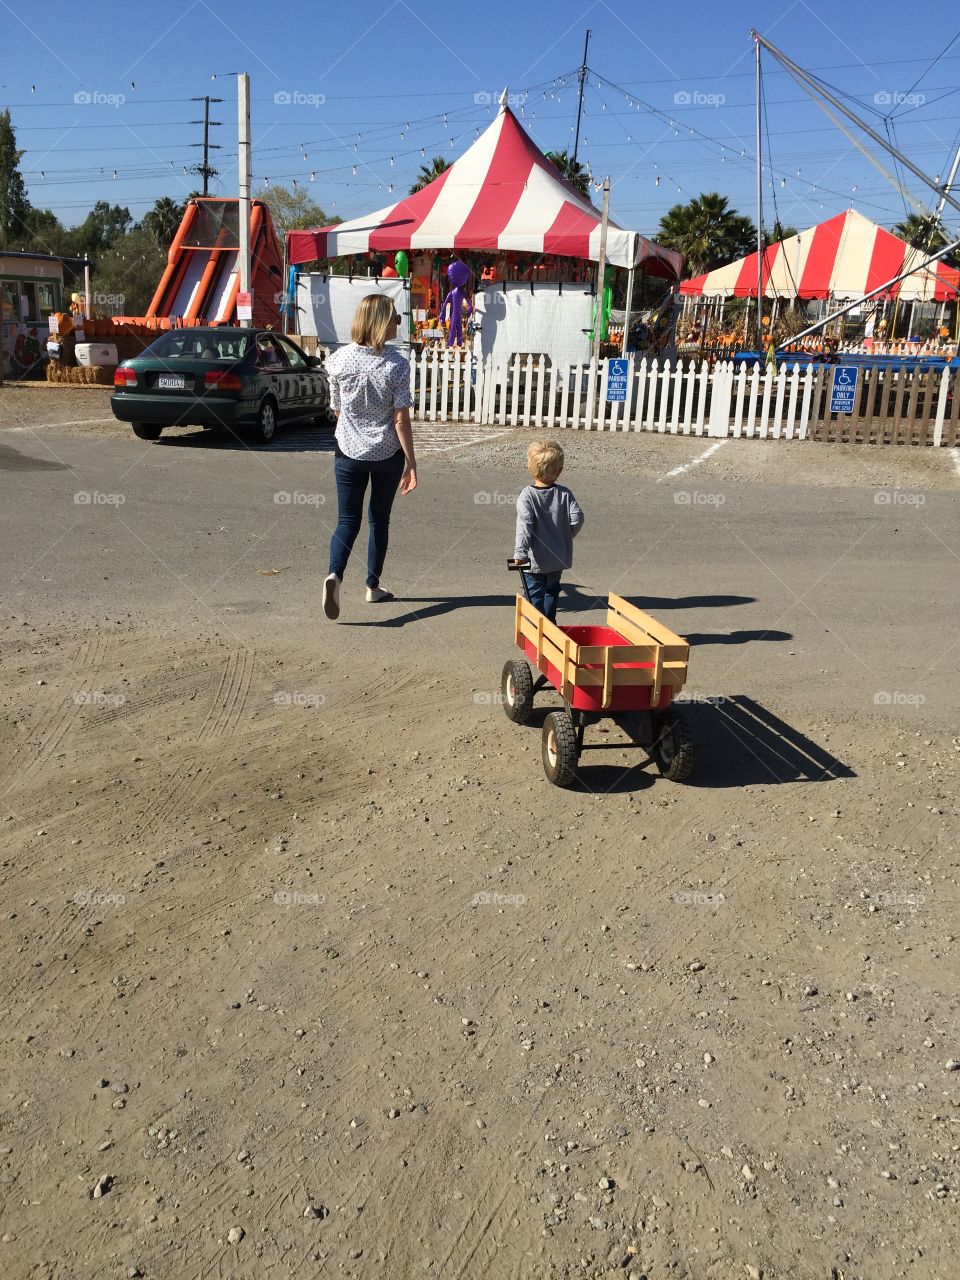 Mother and child at pumpkin patch